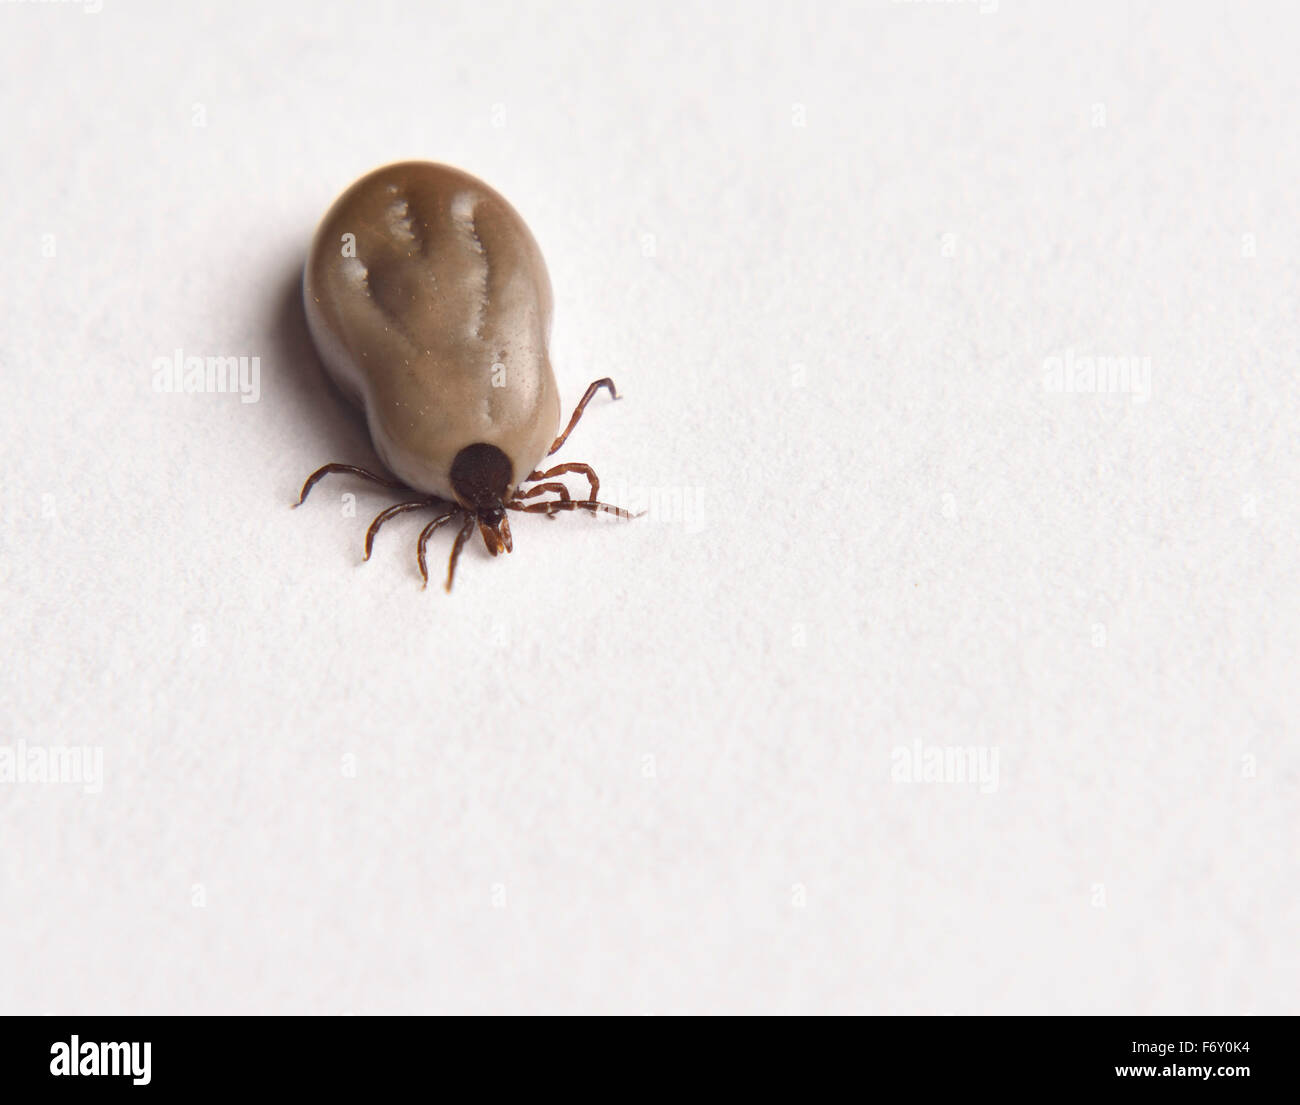 Top view of an engorged female Blacklegged Deer tick that can carry Lyme Disease on white paper Stock Photo